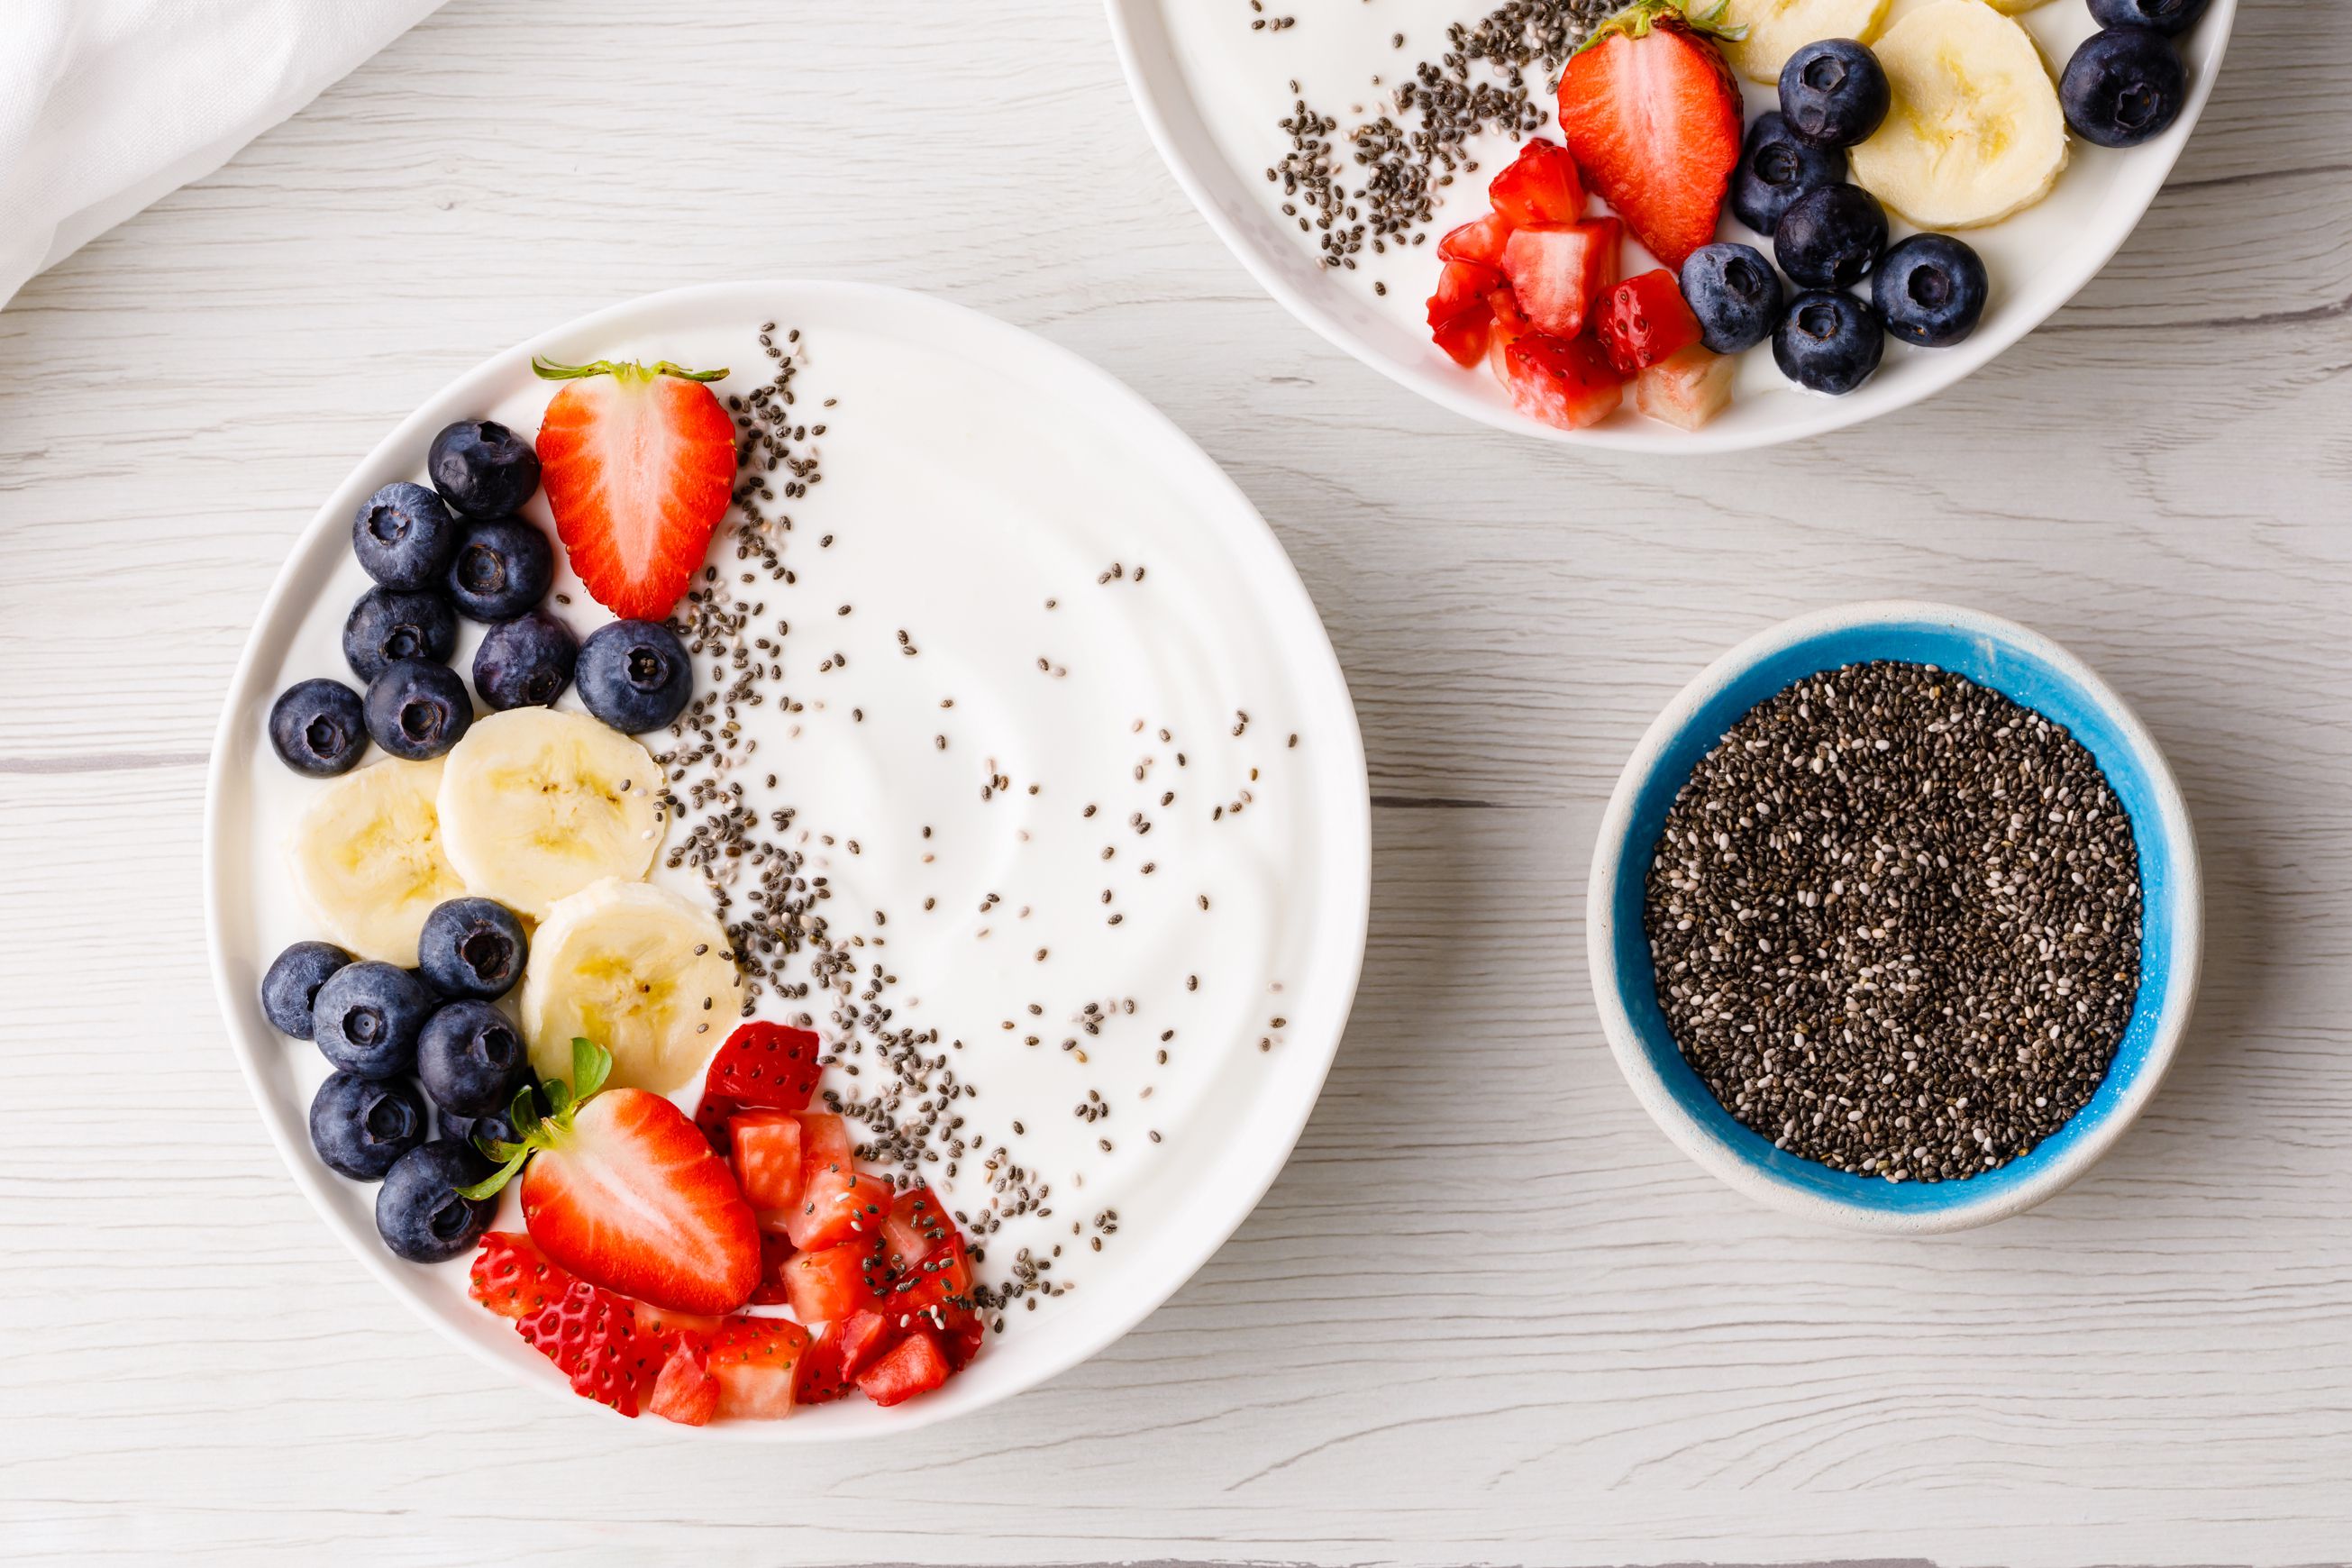 Chia Seeds for Digestion: Benefits and Side Effects